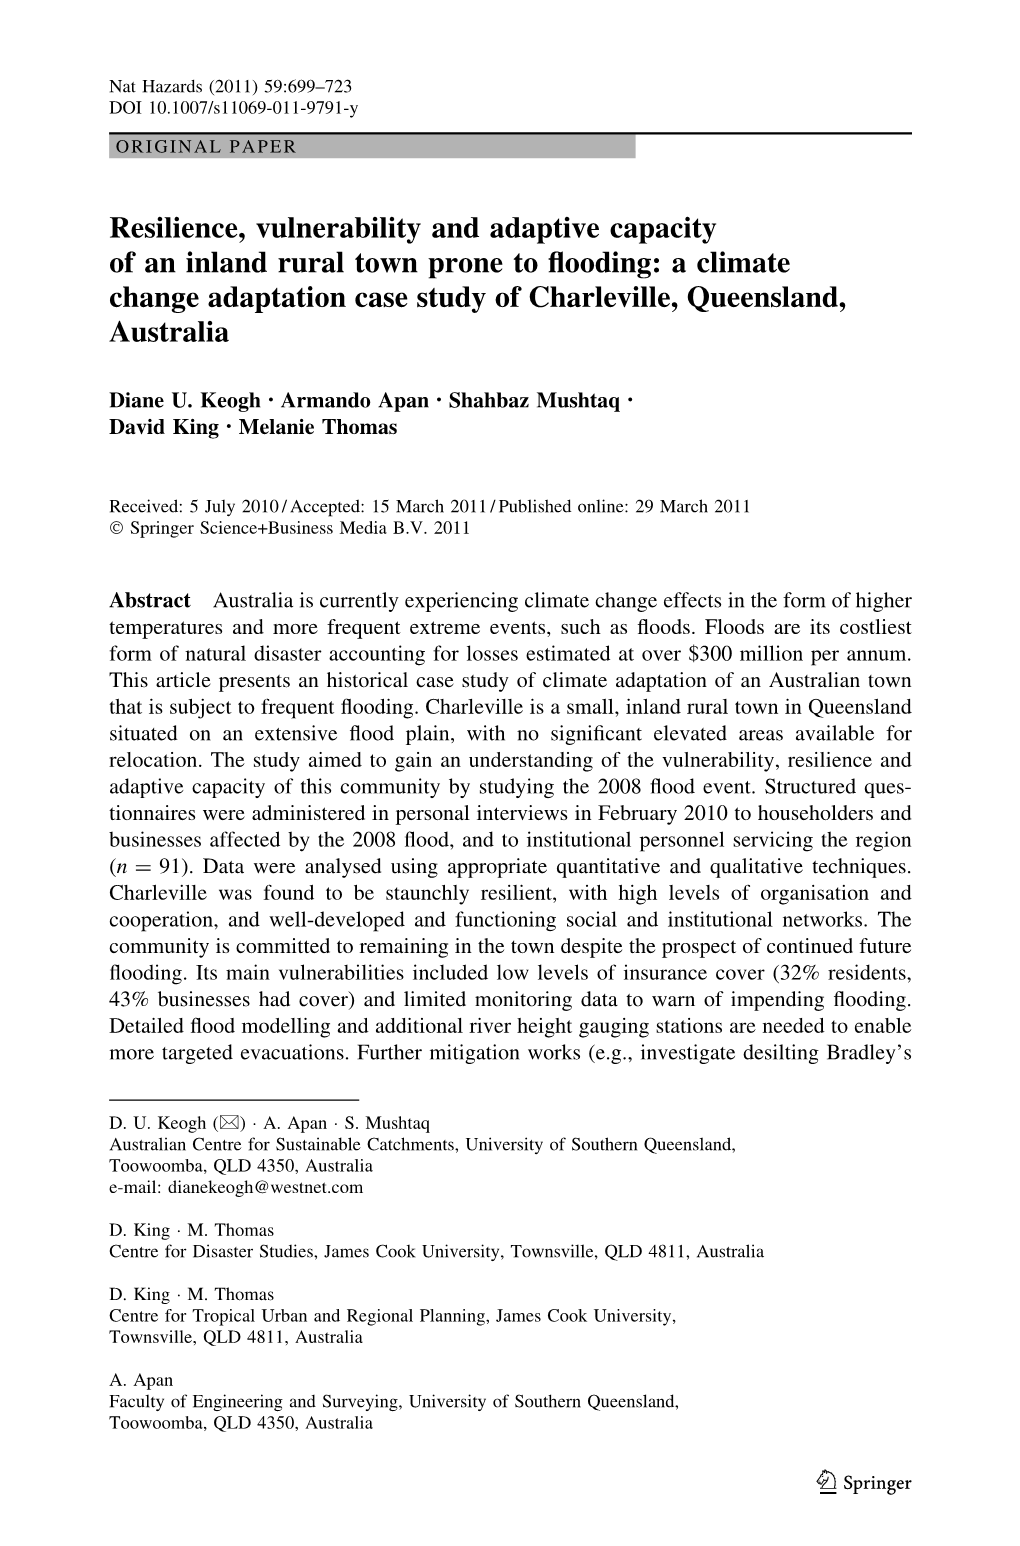 Resilience, Vulnerability and Adaptive Capacity of an Inland Rural Town Prone to ﬂooding: a Climate Change Adaptation Case Study of Charleville, Queensland, Australia